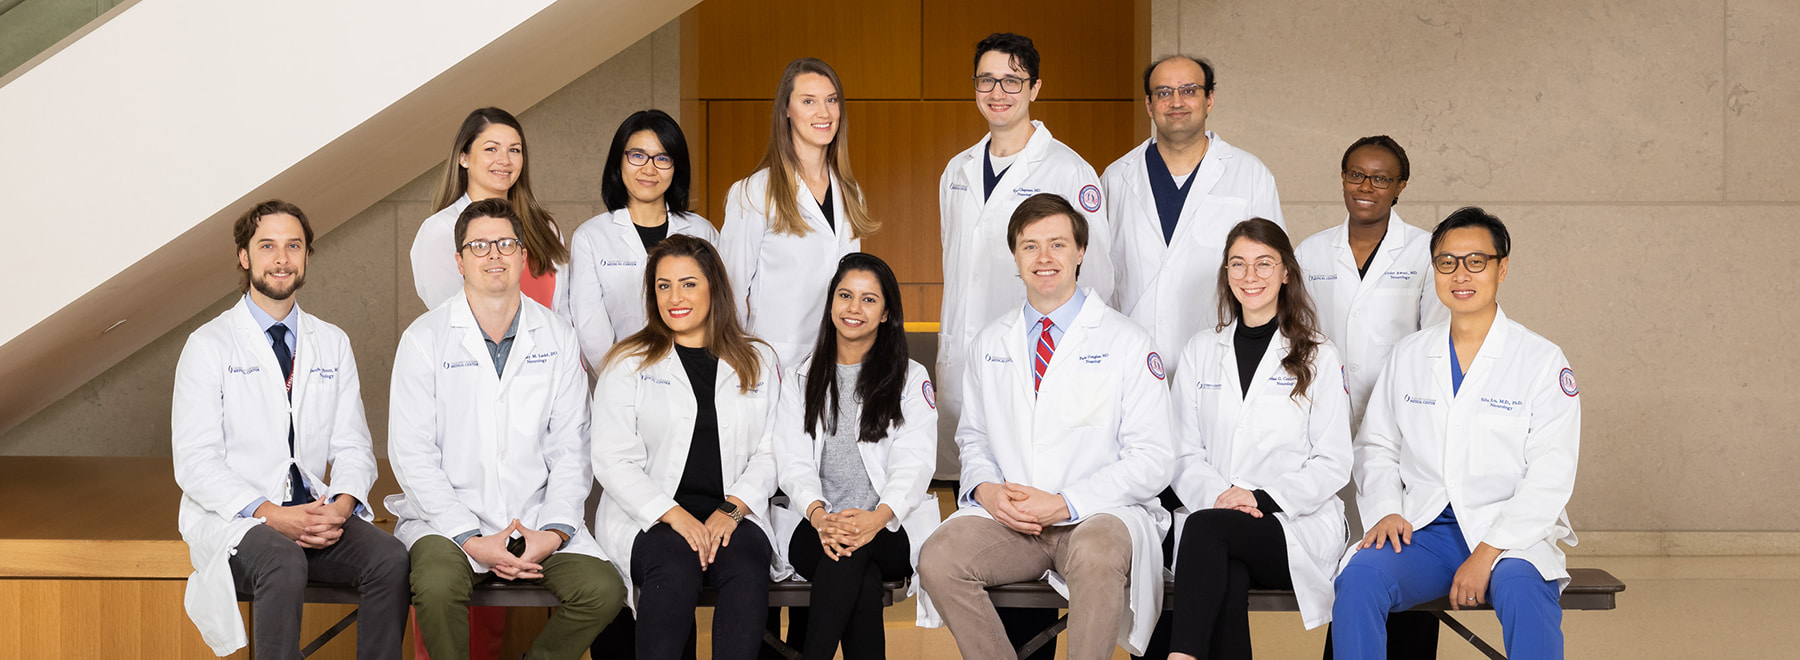 Group picture of neurology residents